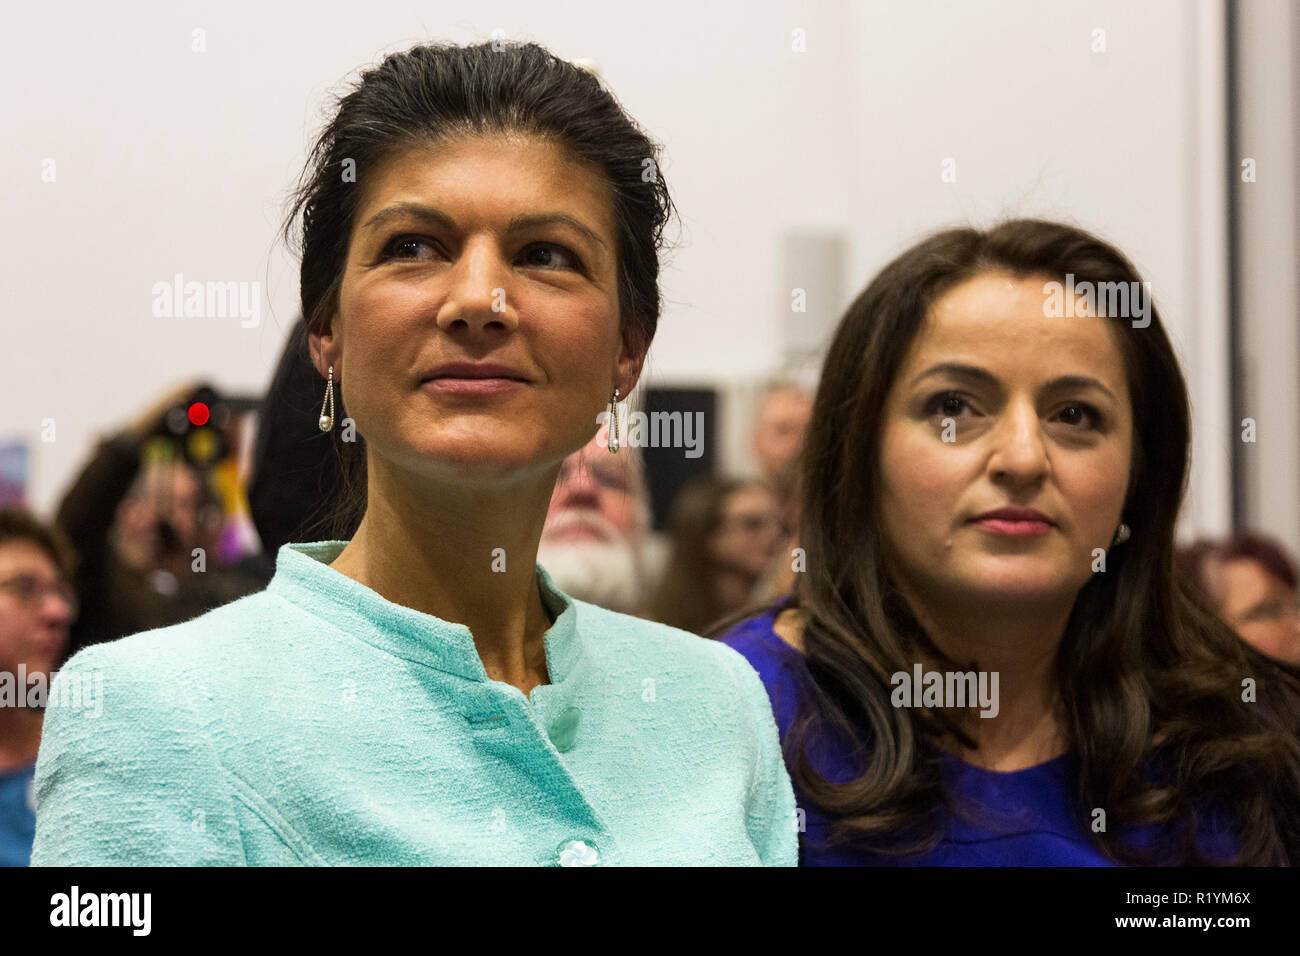 German politicians Sahra Wagenknecht and Sevim Dagdelen from Die Linke party attends a meeting of political movement Aufstehen in Bochum, Germany Stock Photo